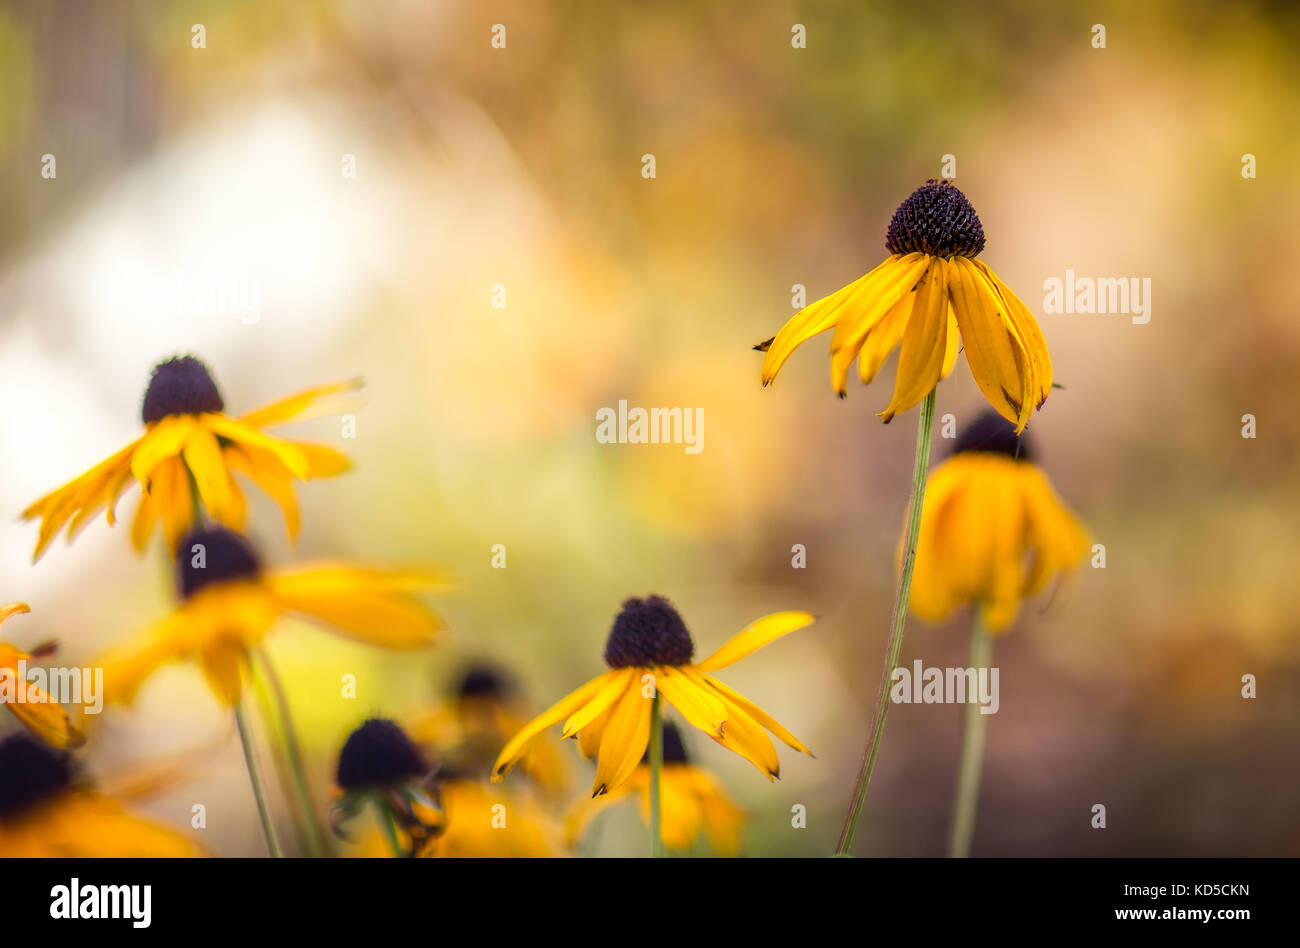 Ethereal photograph of yellow coneflowers with blurred background Stock Photo